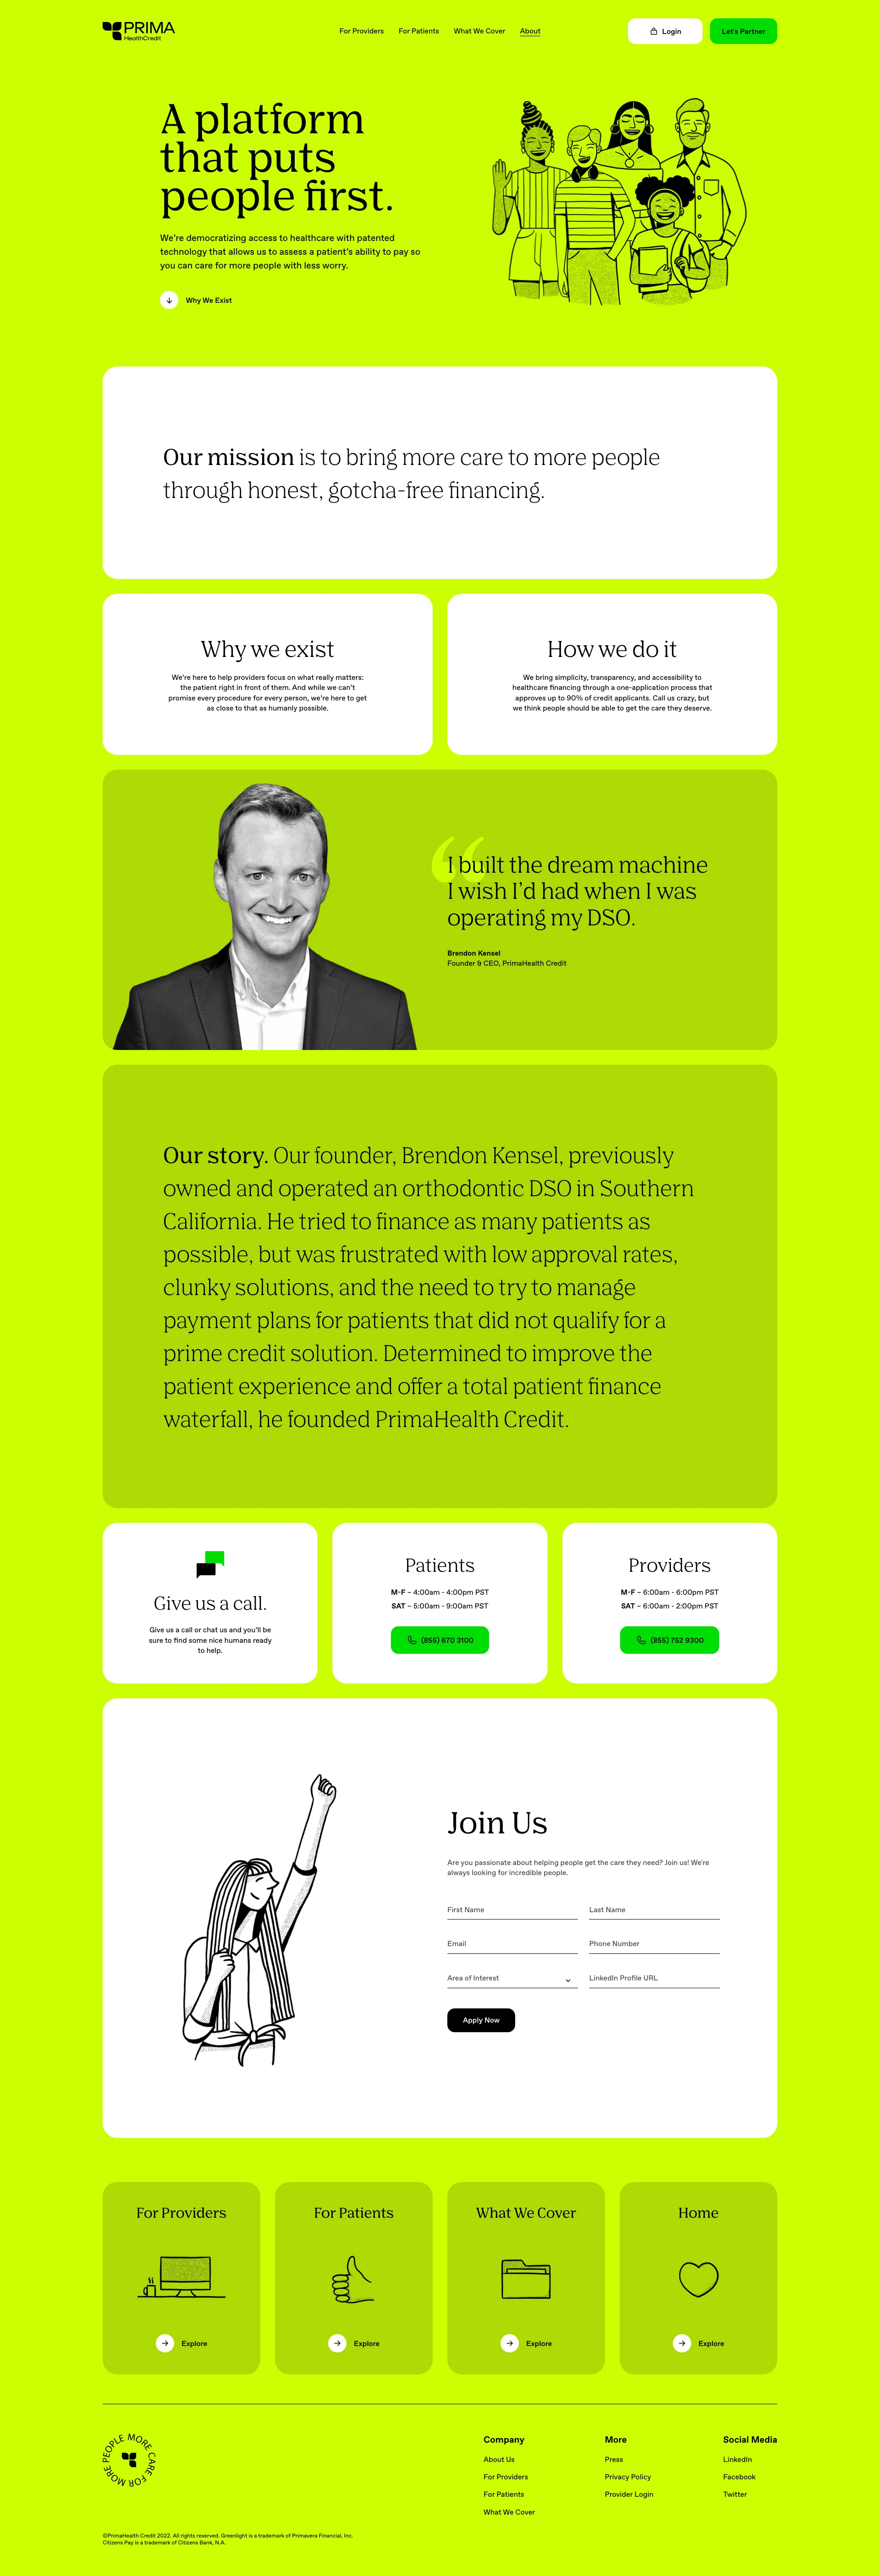 PrimaHealth Credit Landing Page Example: We help more patients access the healthcare they need by offering affordable monthly payment options and a total patient finance solution to healthcare providers.